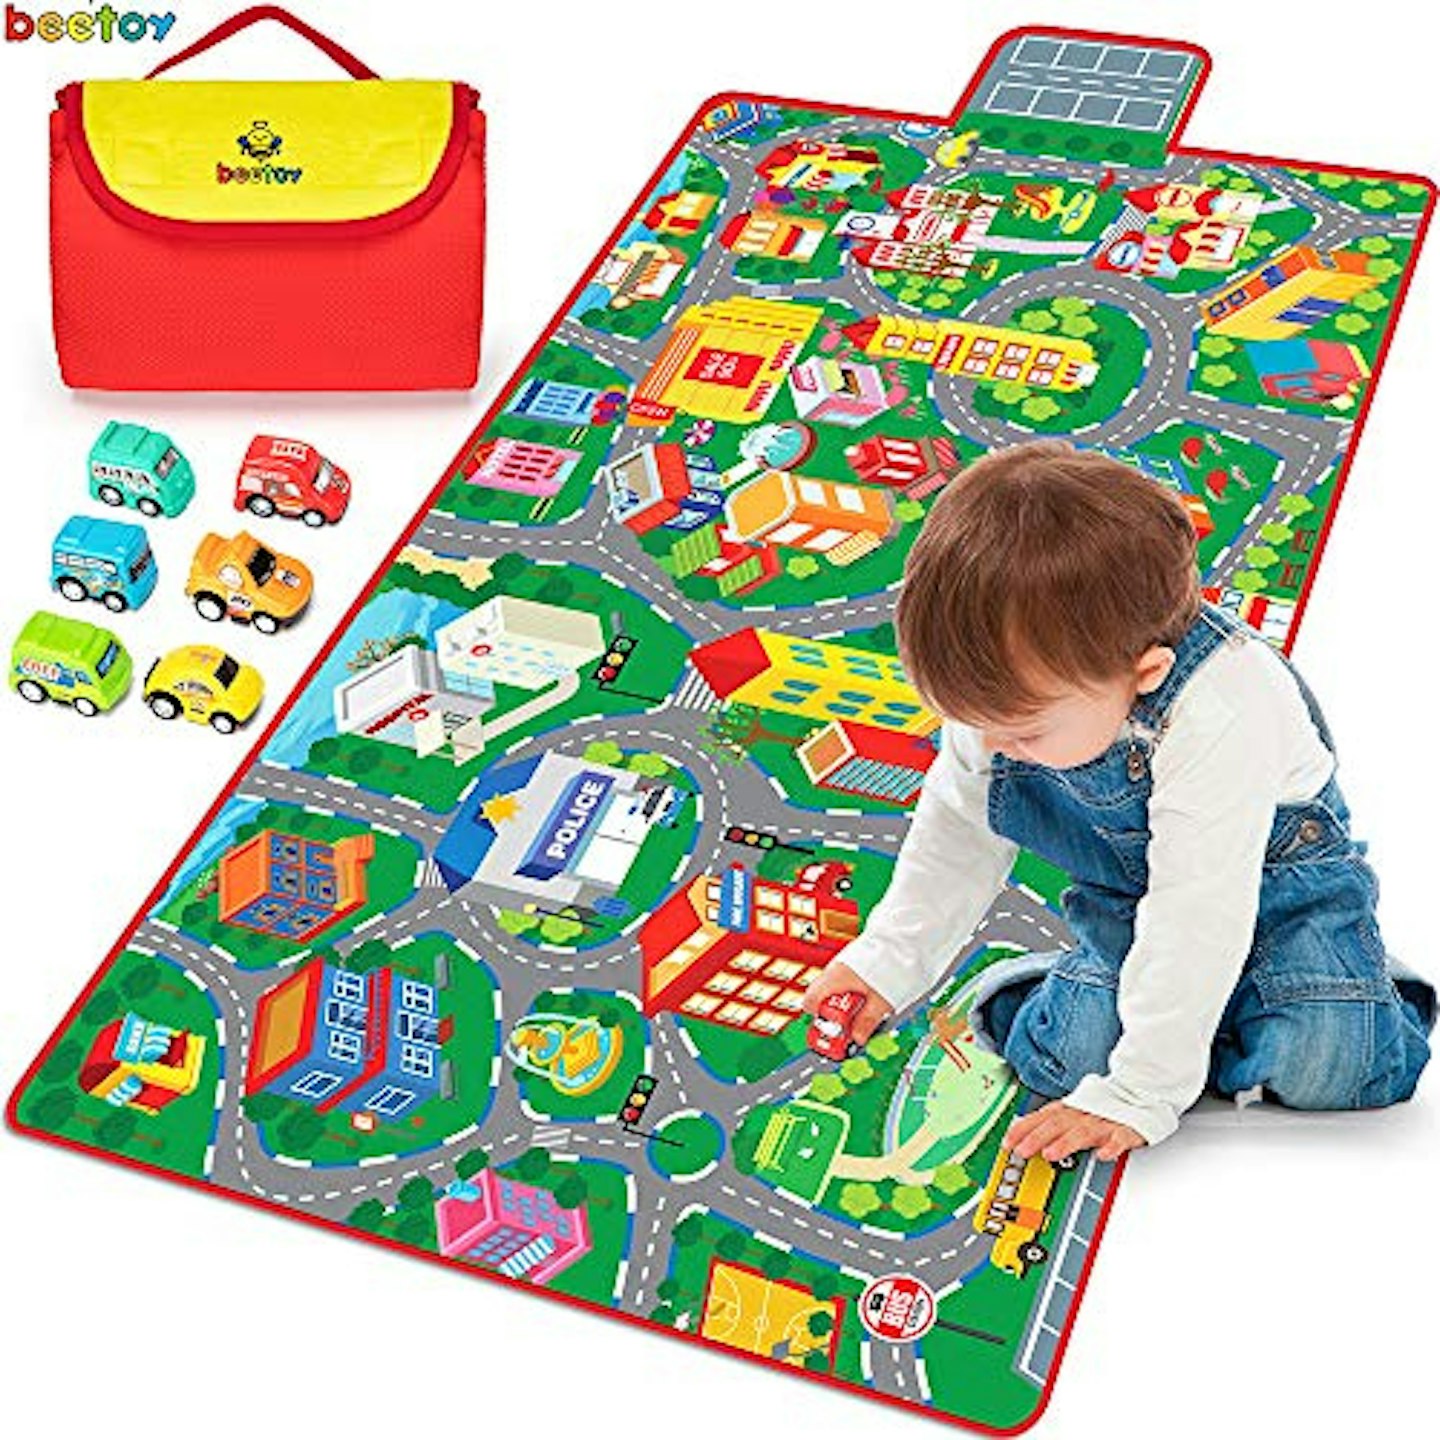 Beetoy Kids Road Carpet Playmat for Toy Cars